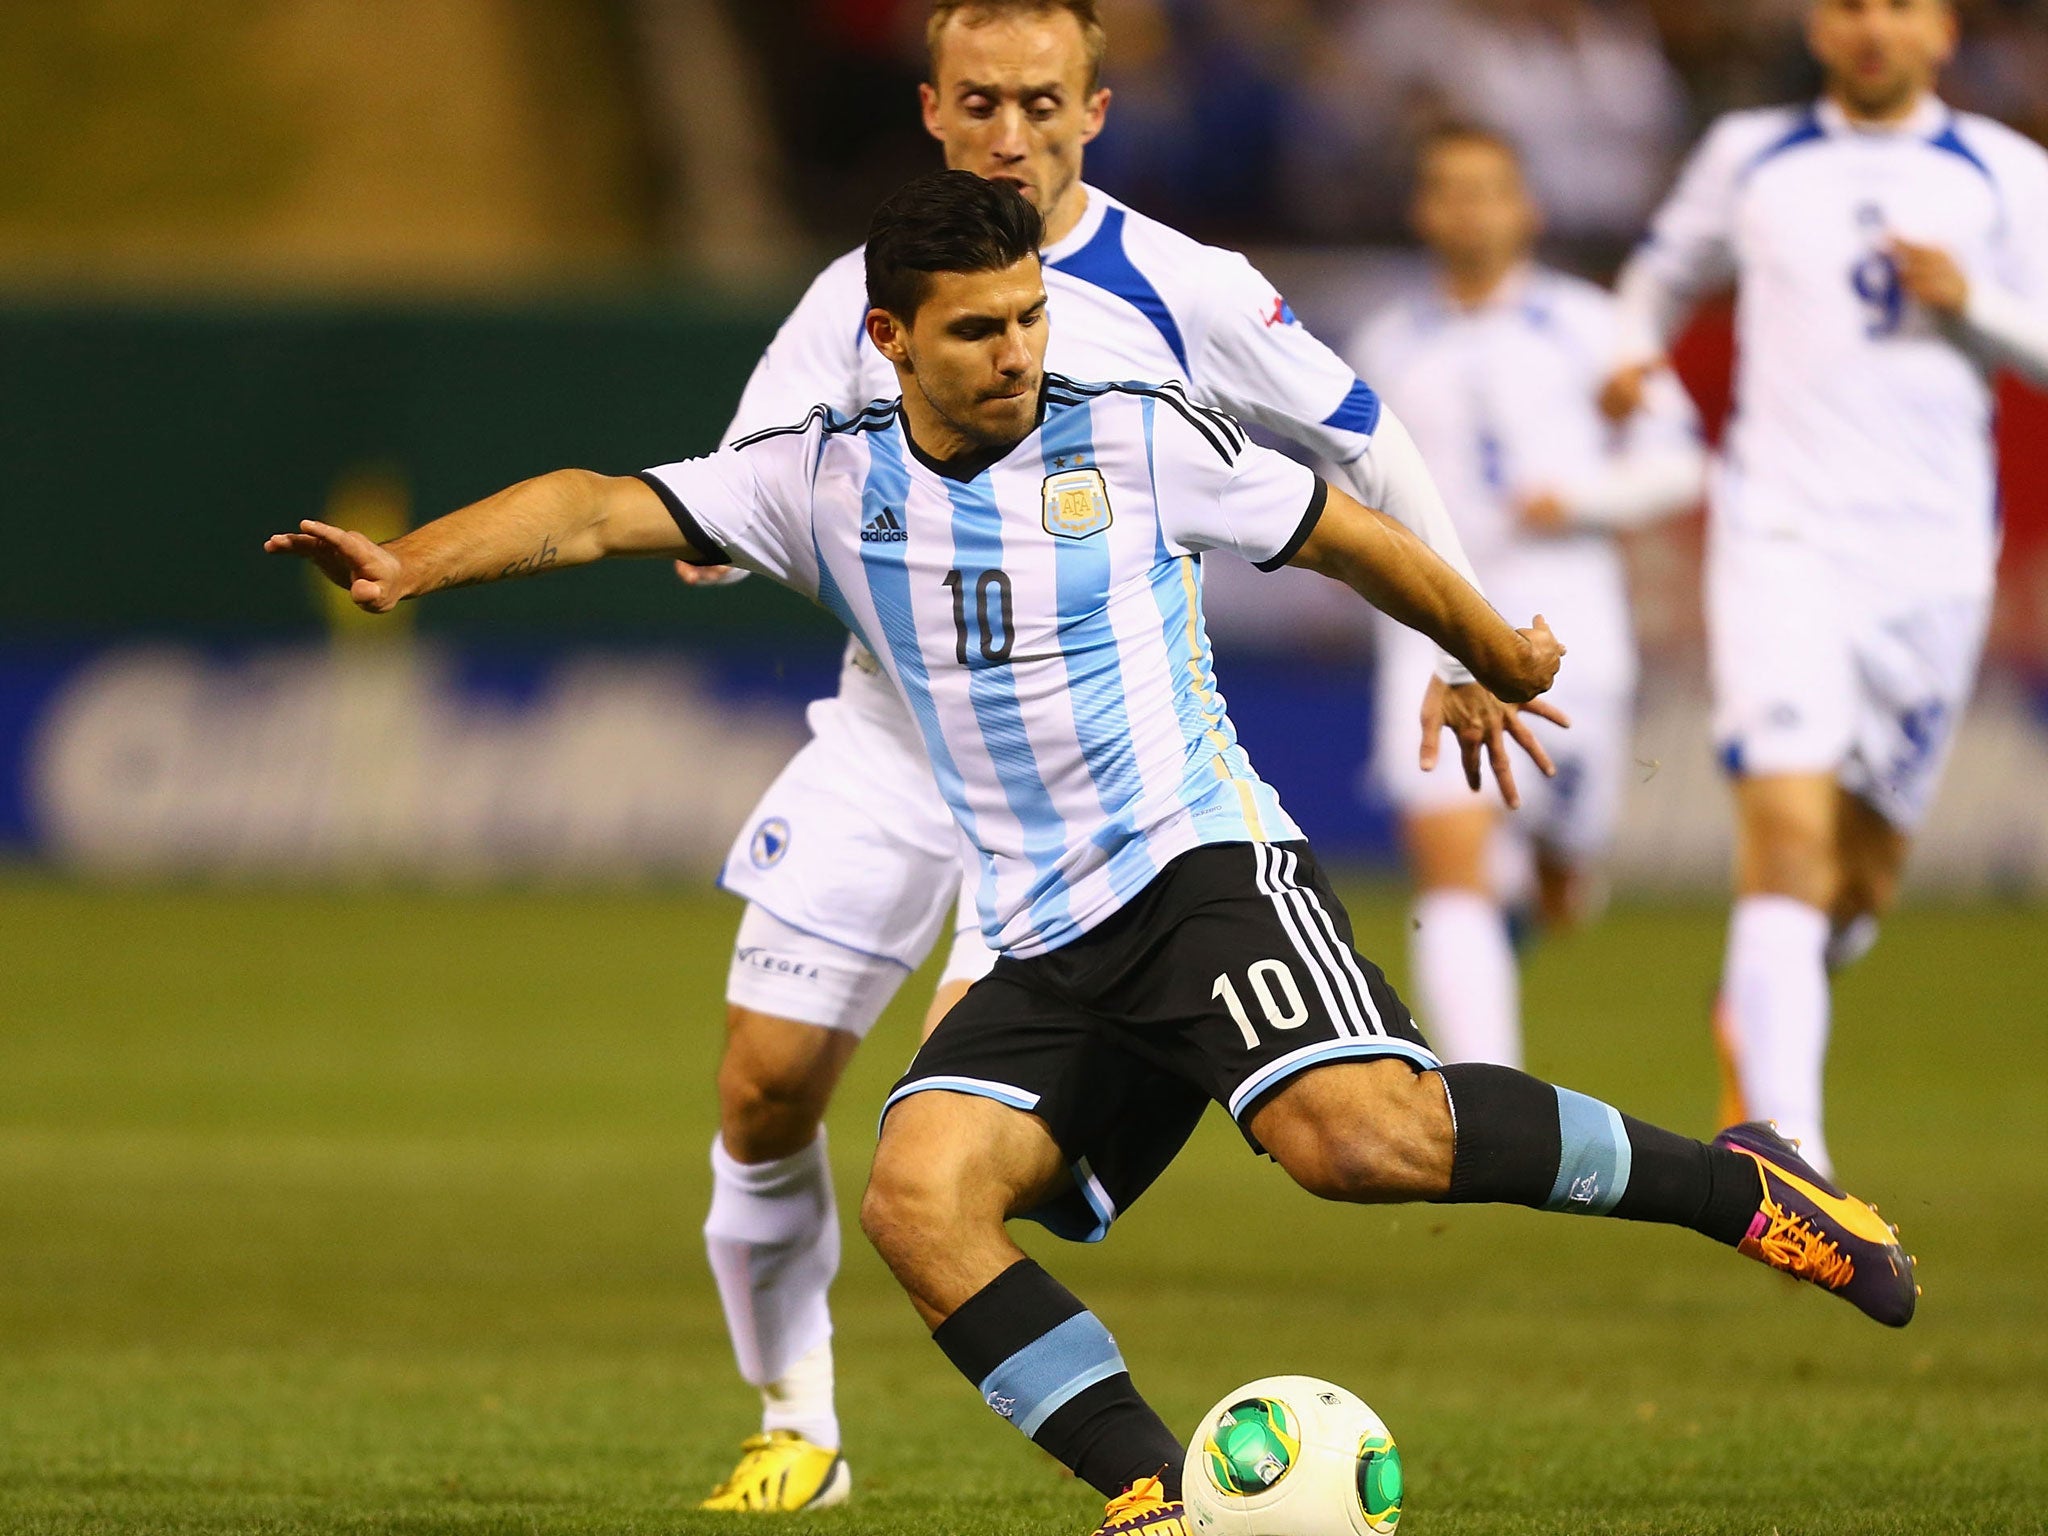 Sergio Aguero takes a shot at goal during Argentina's 2-0 win over Bosnia on Monday